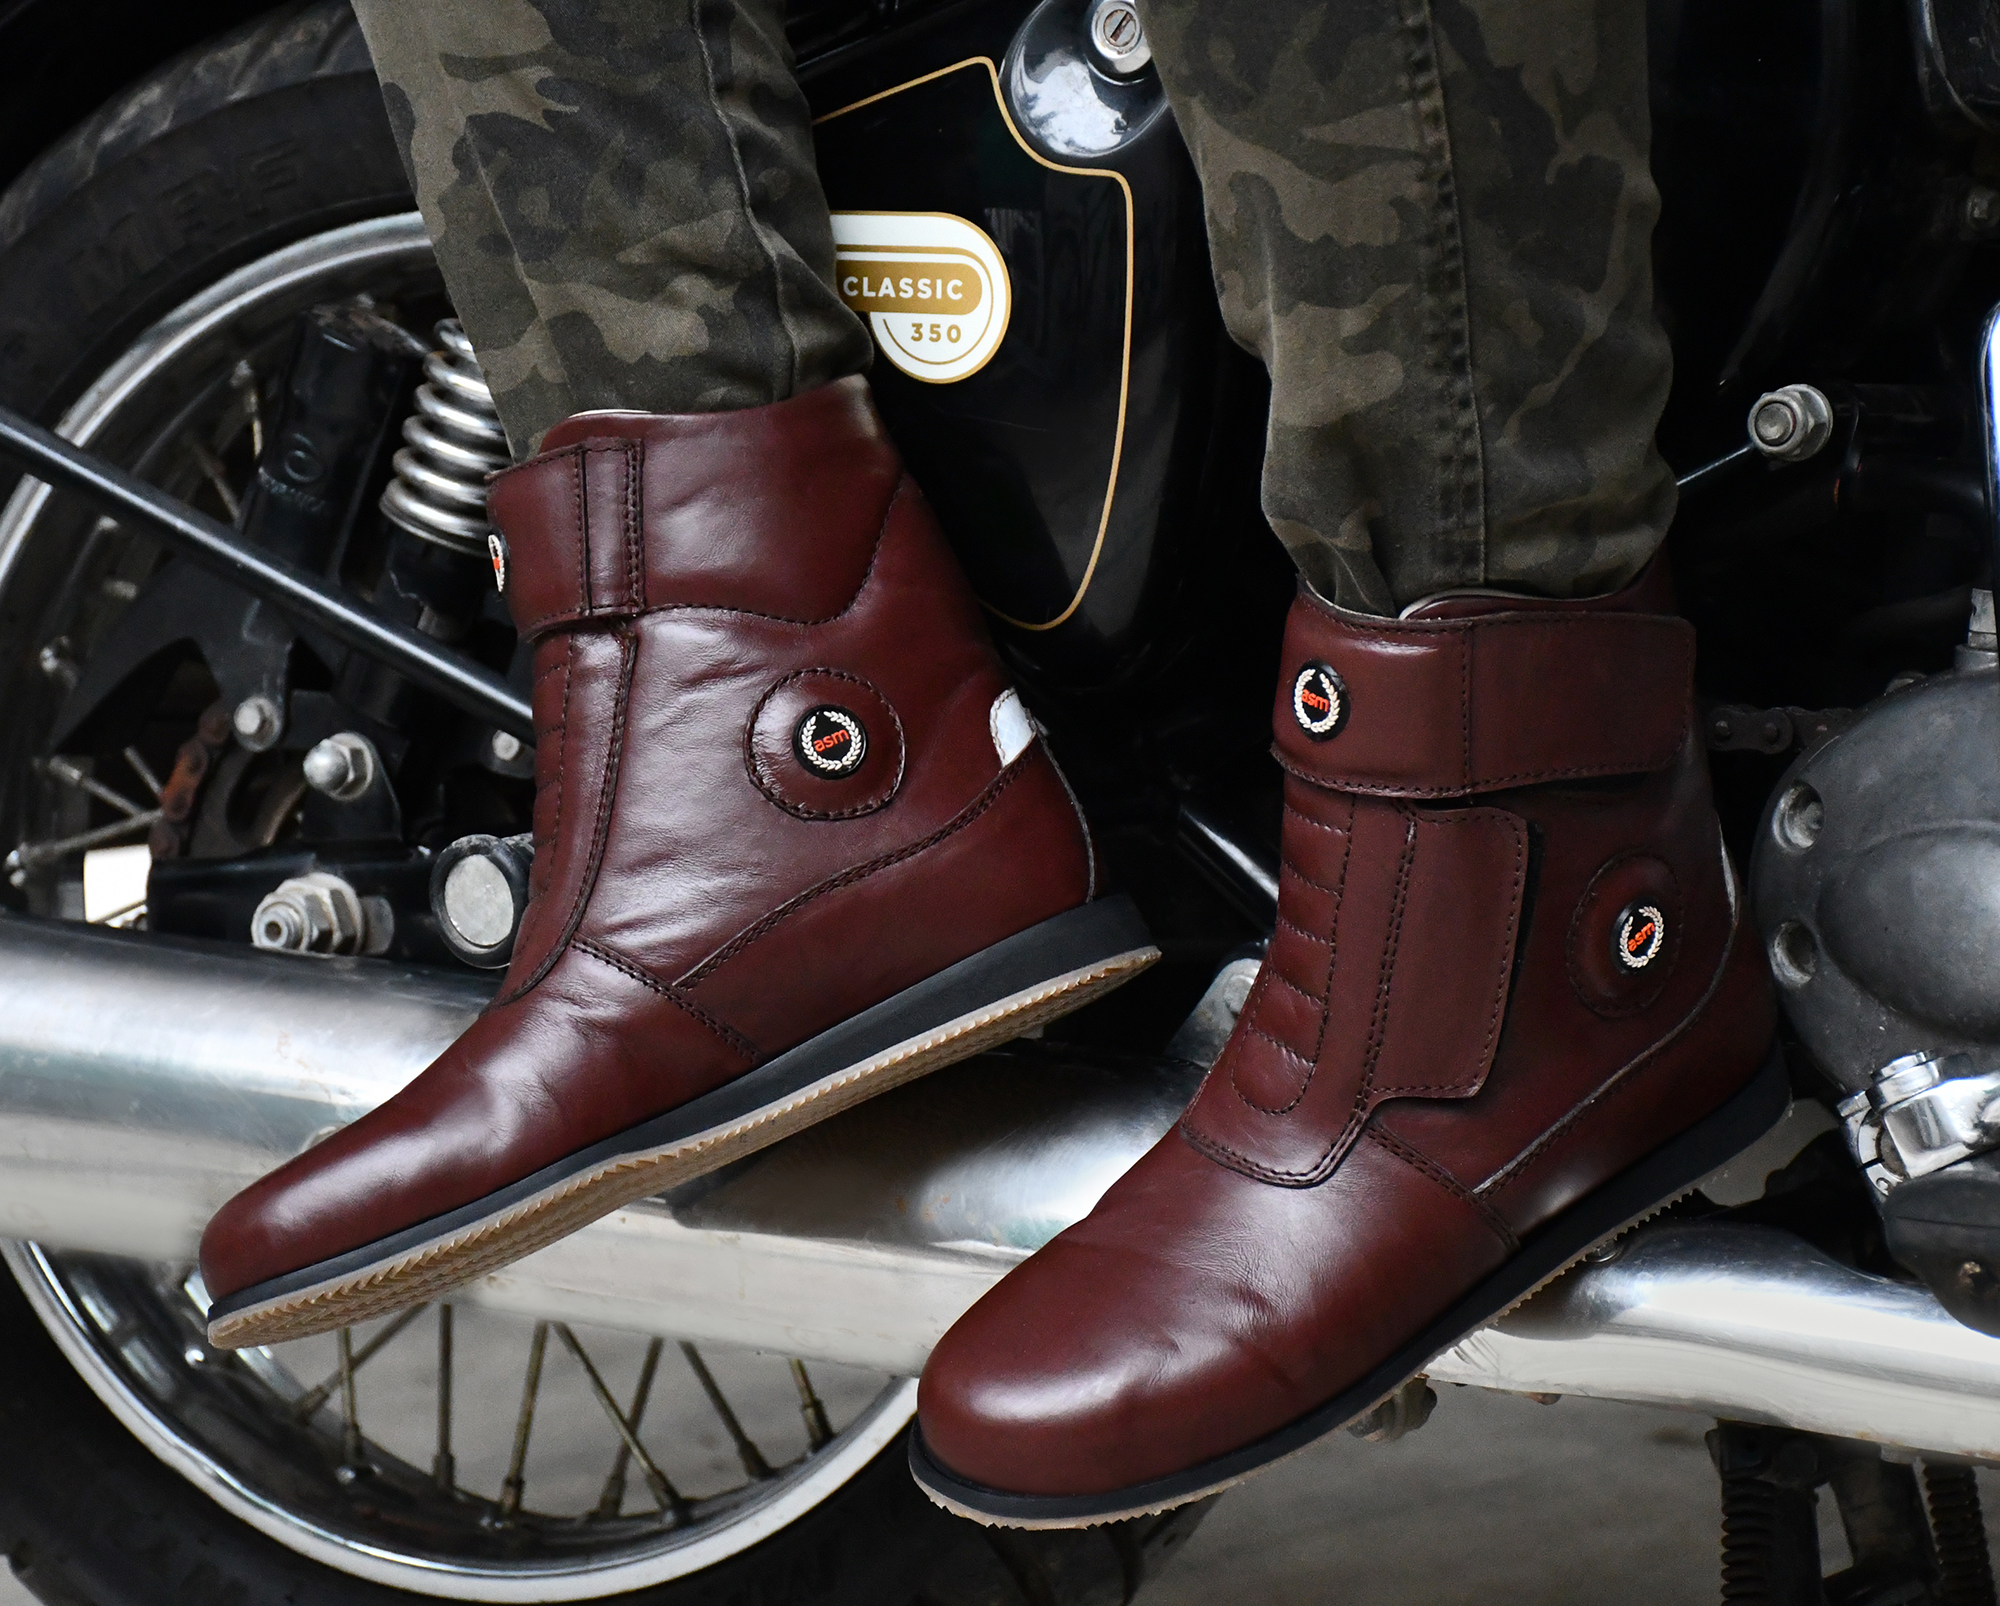 Biker Boots : Urban leather Boots with side chain for Bikers with heavy duty Rubber Sole by ASM. Article : Biker702MEBrown